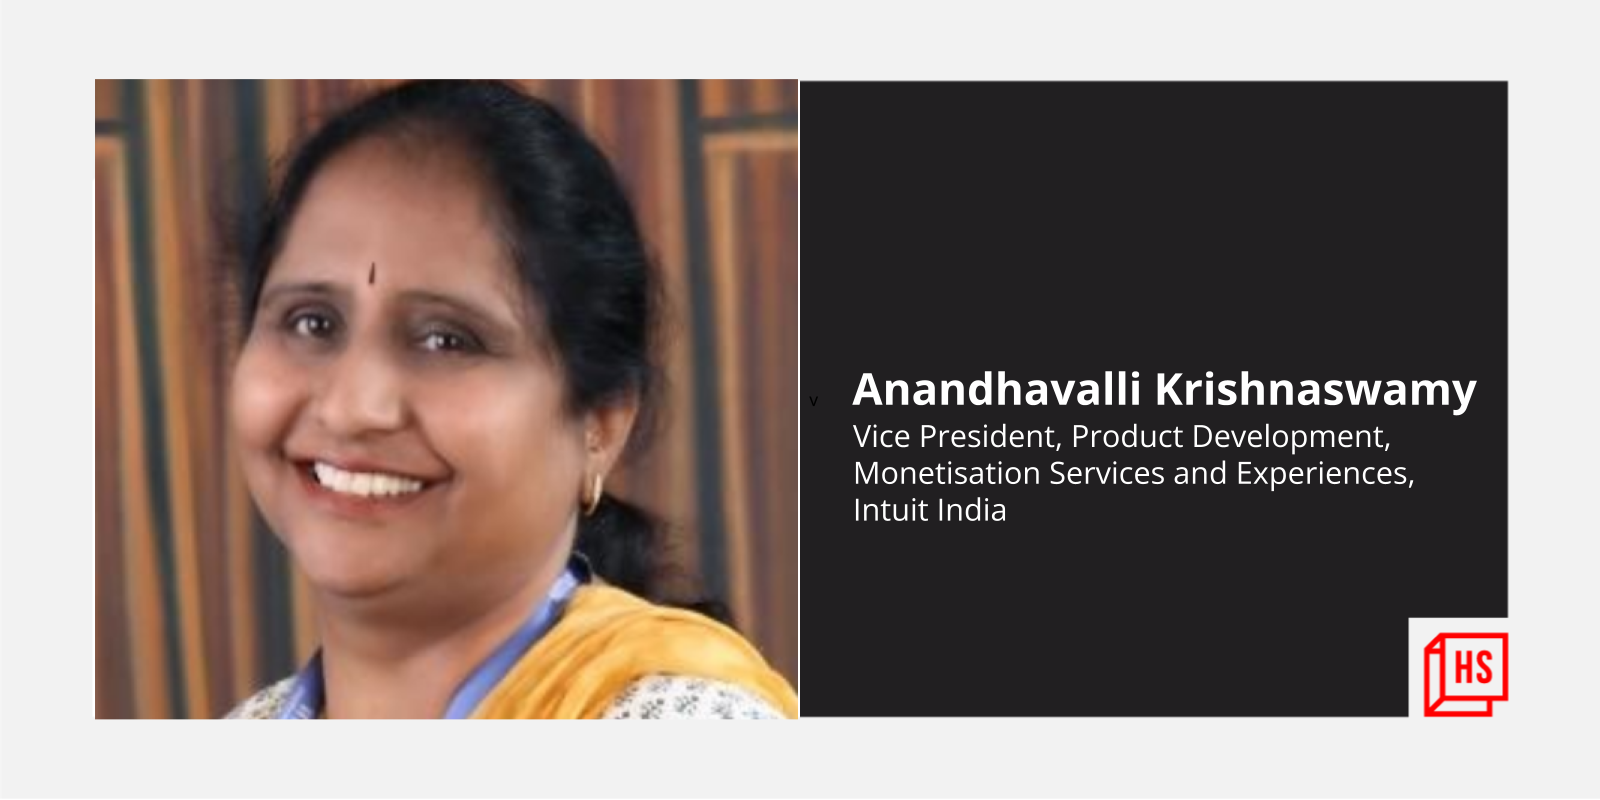 [Women in Tech] With over 23 years’ experience, Anandhavalli Krishnaswamy of Intuit believes every day comes with new learnings